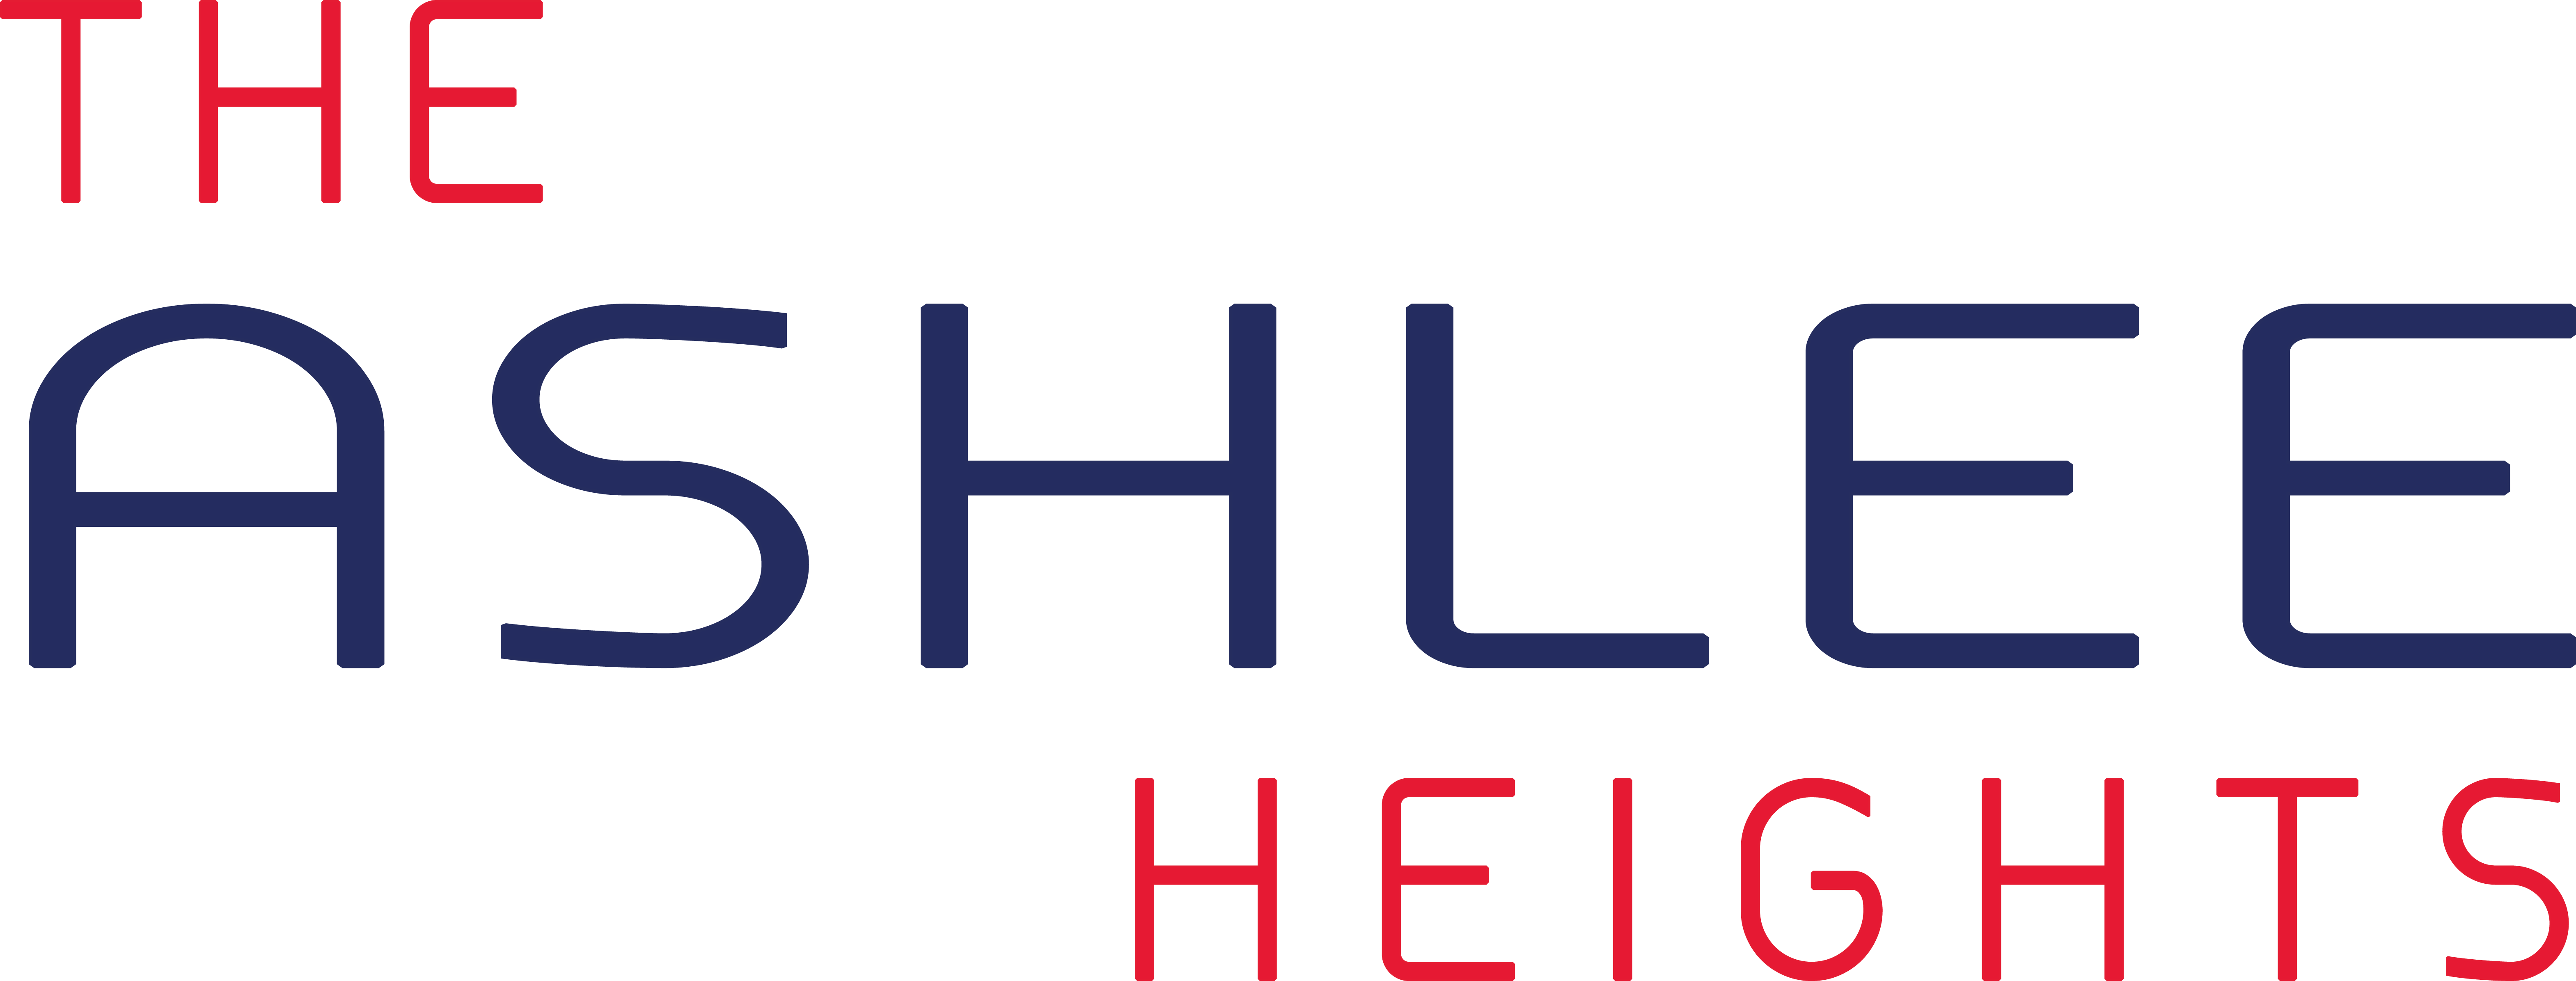 Ashlee Logo - The ASHLEE Heights Patong Hotel & Suites